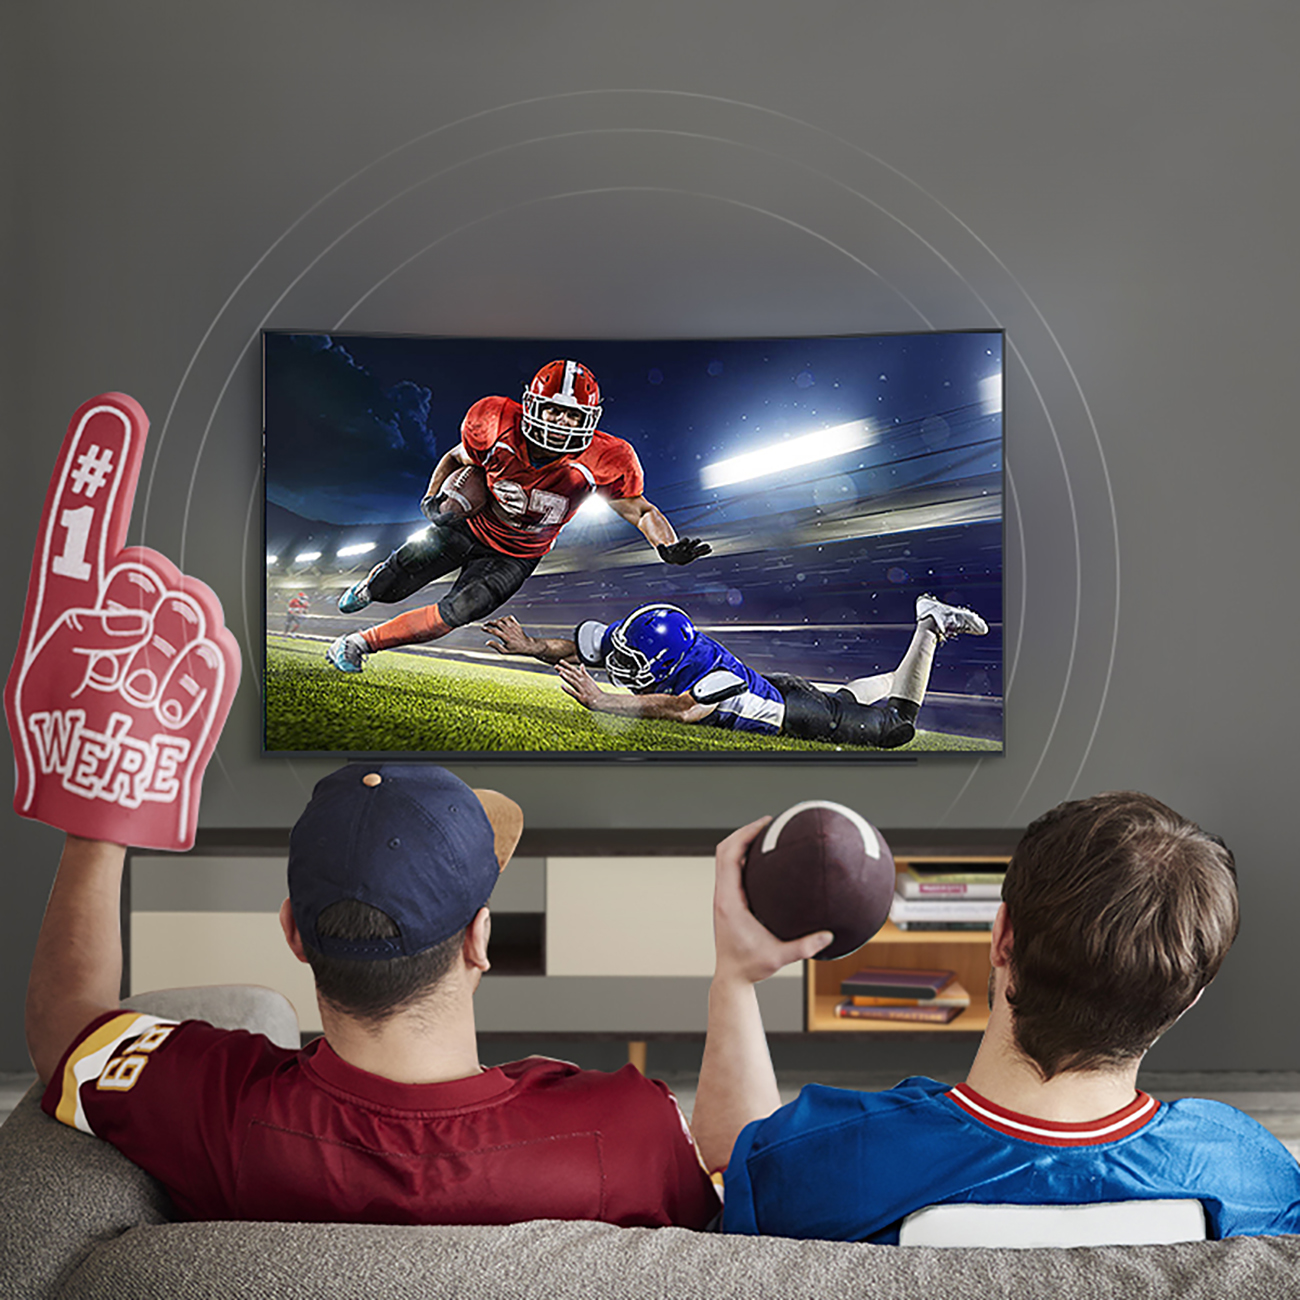 Men watching a football match on TV using the Ugreen MD112 adapter with mini DisplayPort (male) and HDMI (female) connectors with Full HD 1080p resolution